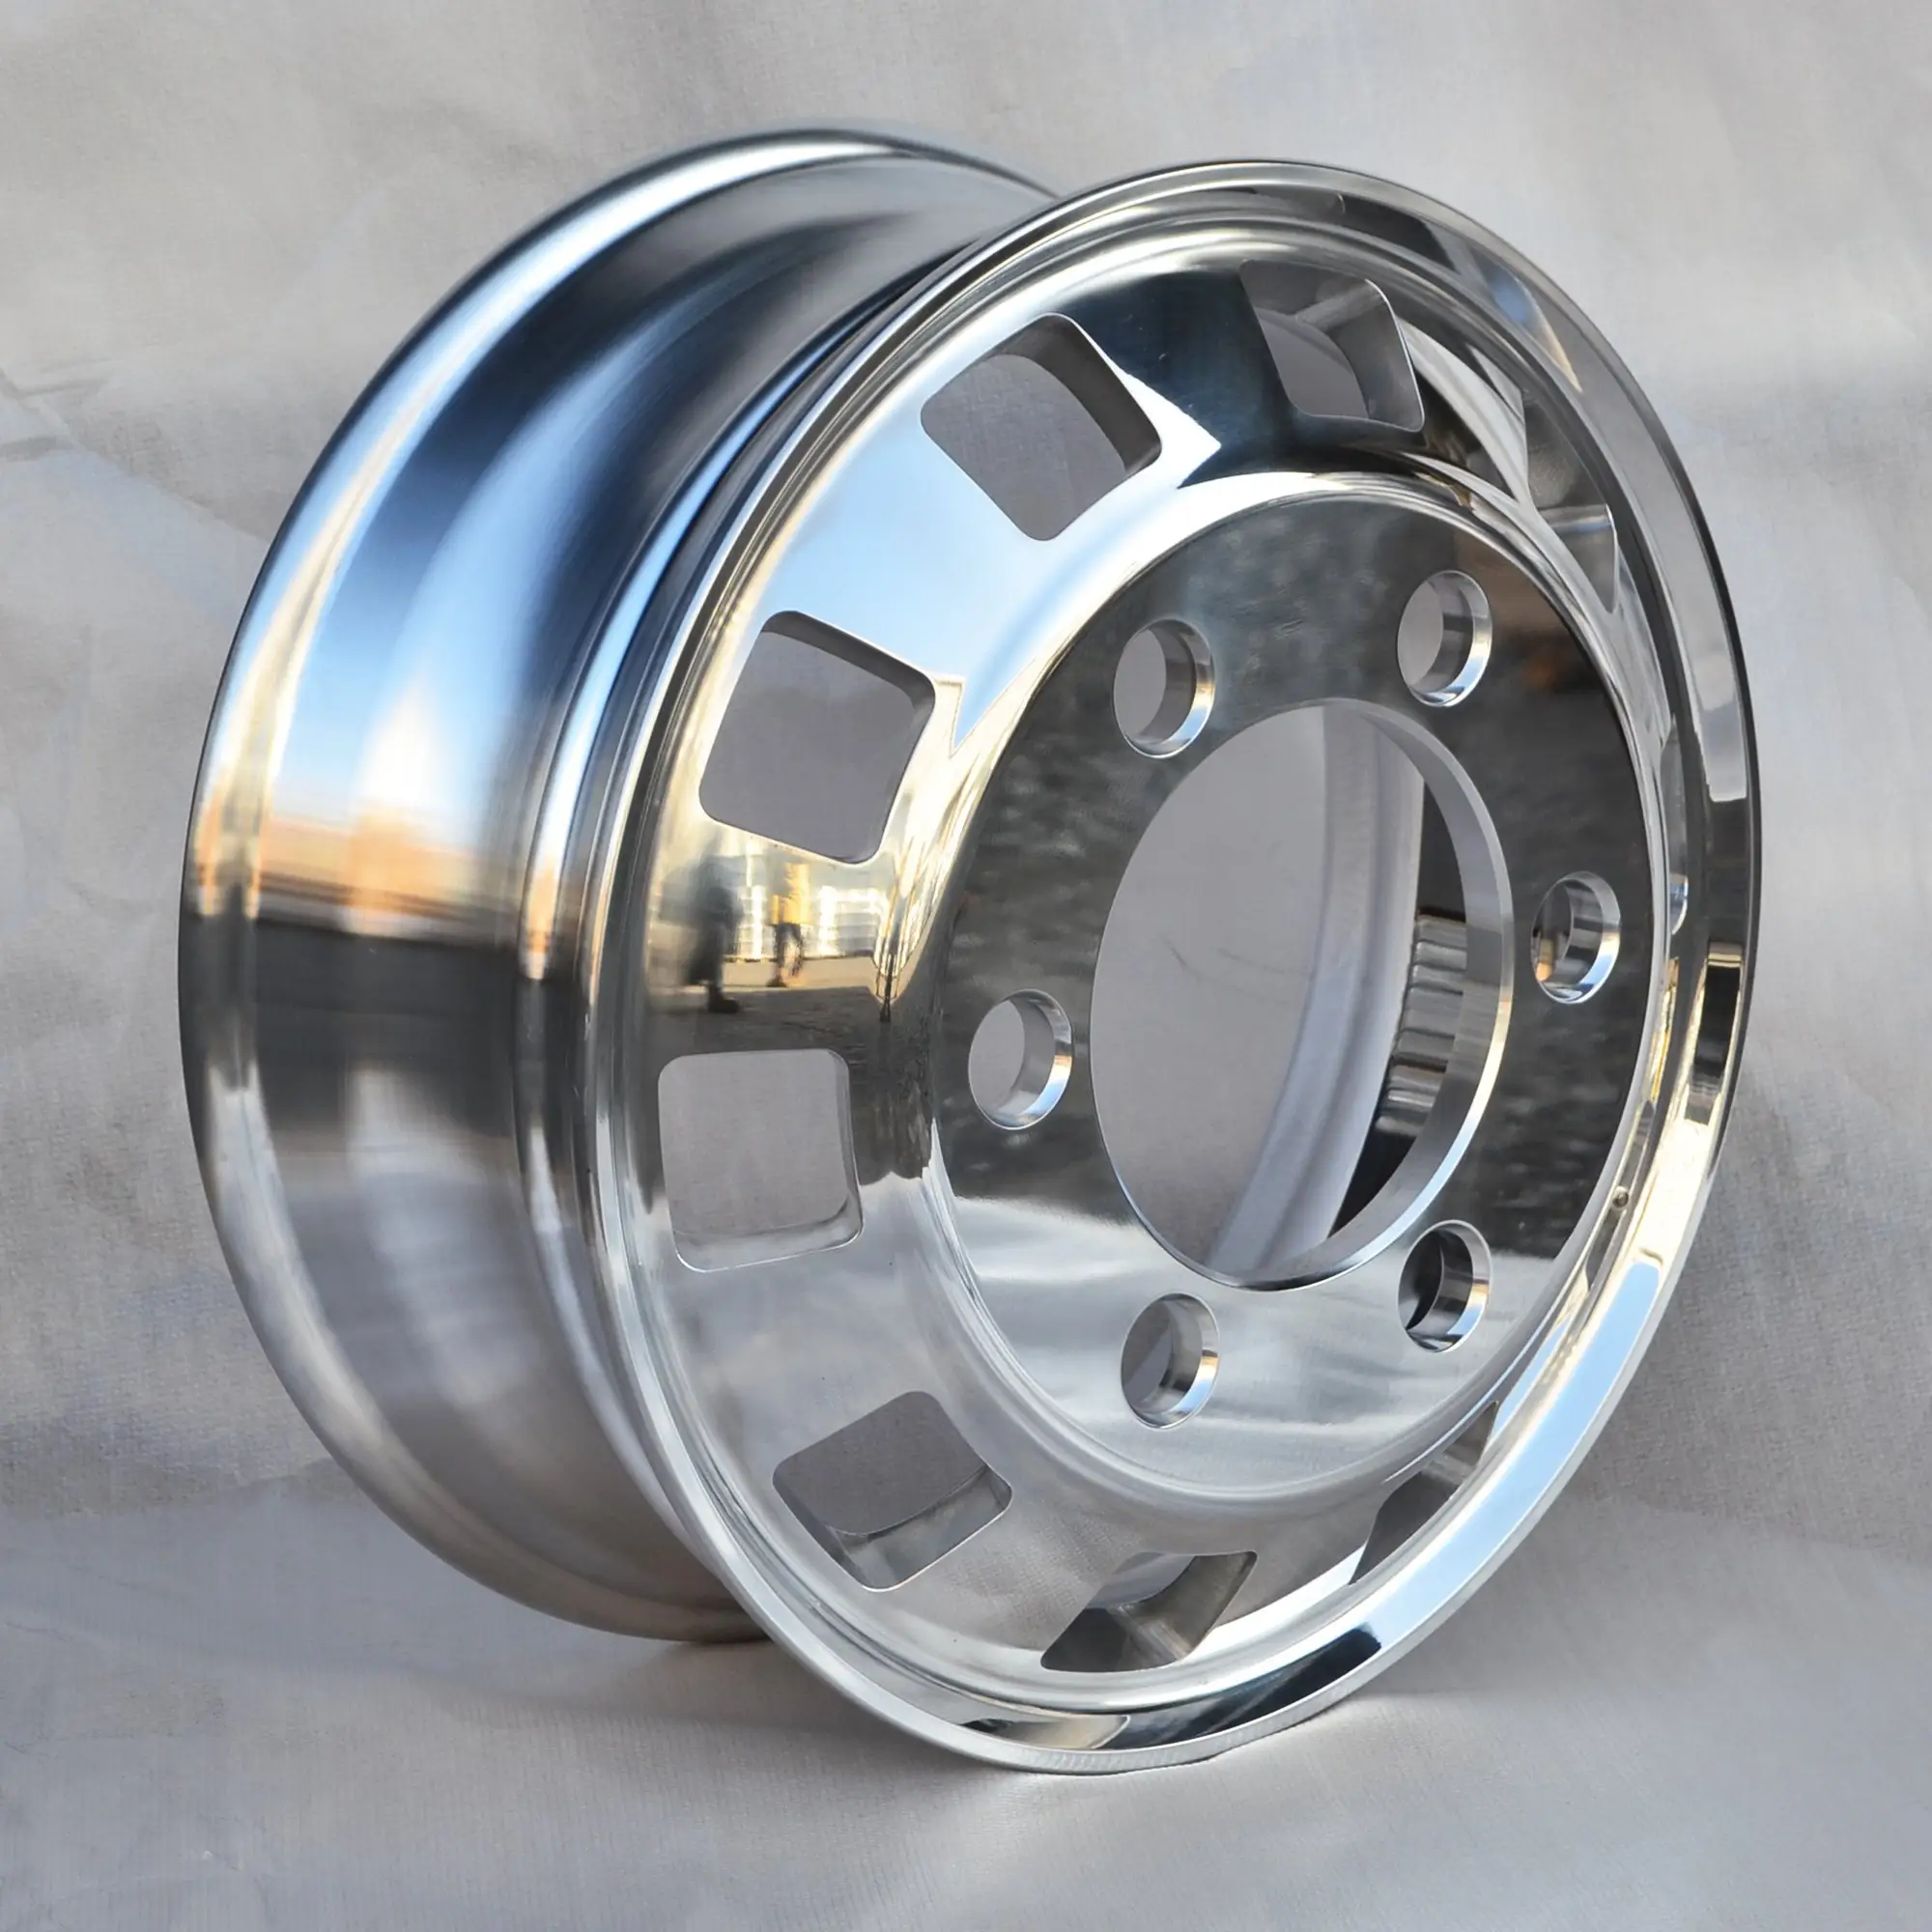 17.5*6.0 inch forged alloy semi commercial truck and bus trailer wheel and rim 225 825 cast steel wheel